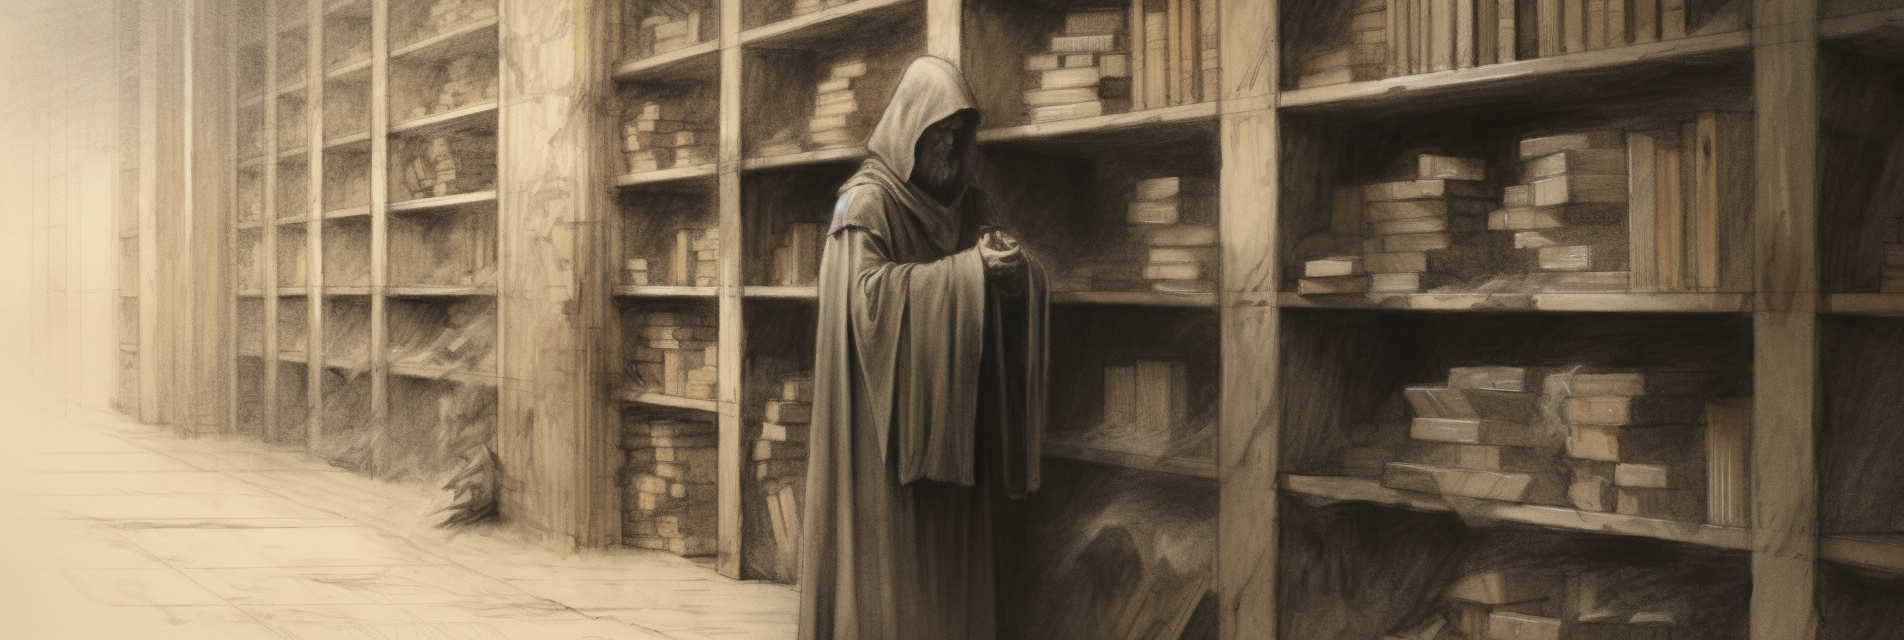 A pencil drawing of a man in a hooded robe standing next to large shelves of books